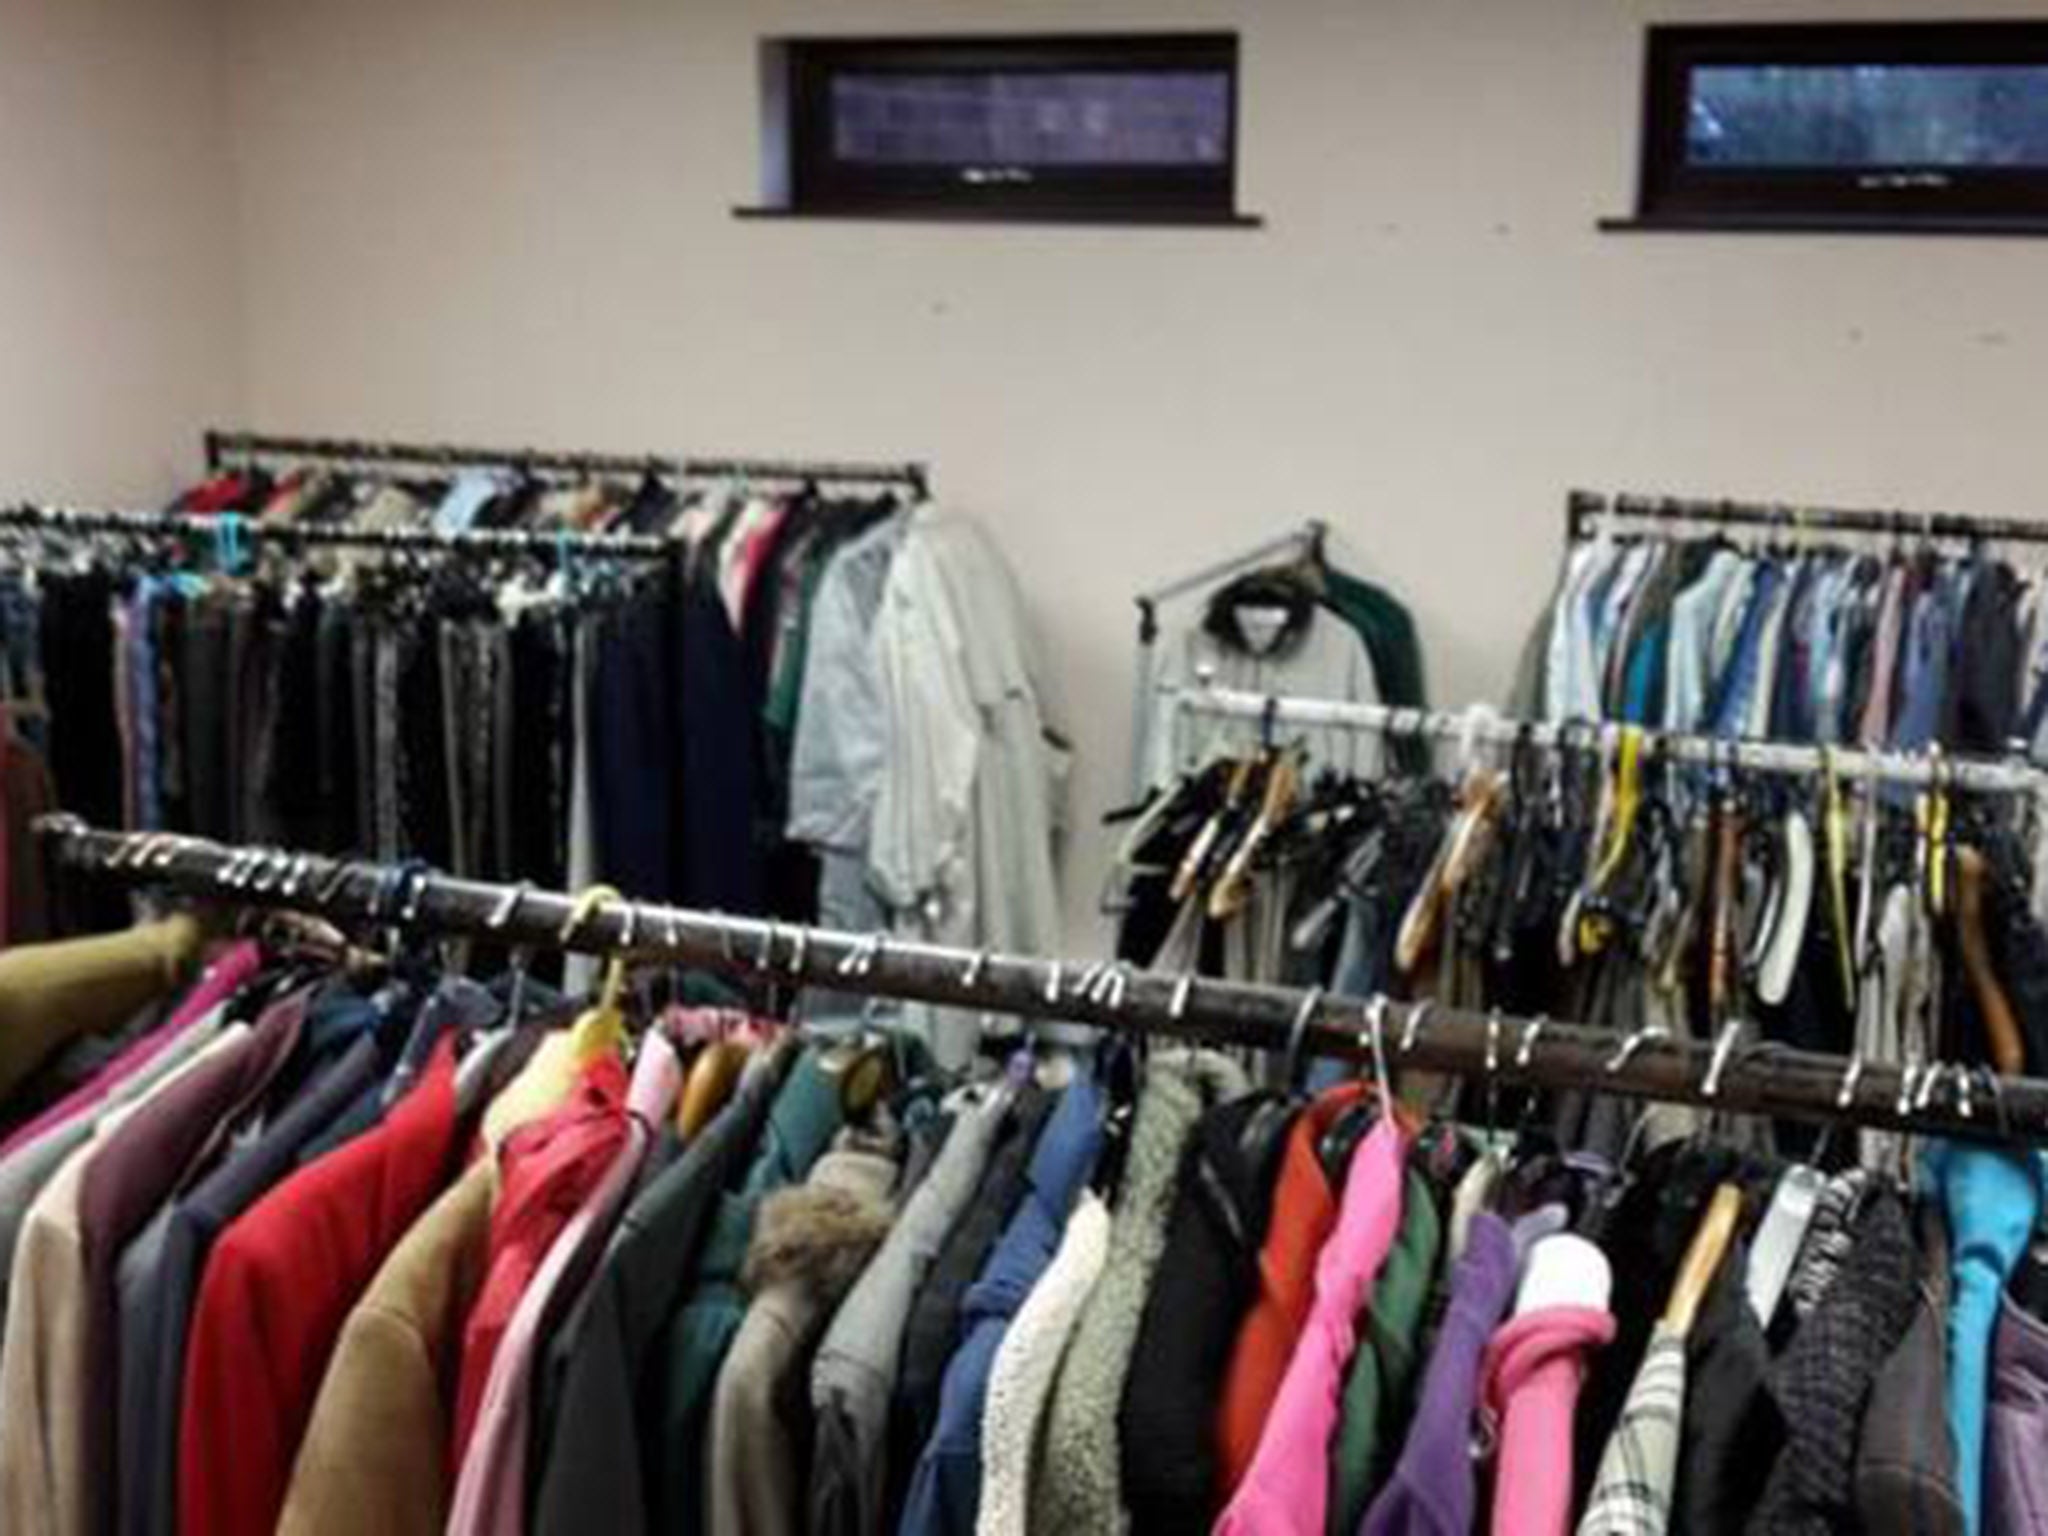 Some of the clothing donated to Sharewear in Nottingham